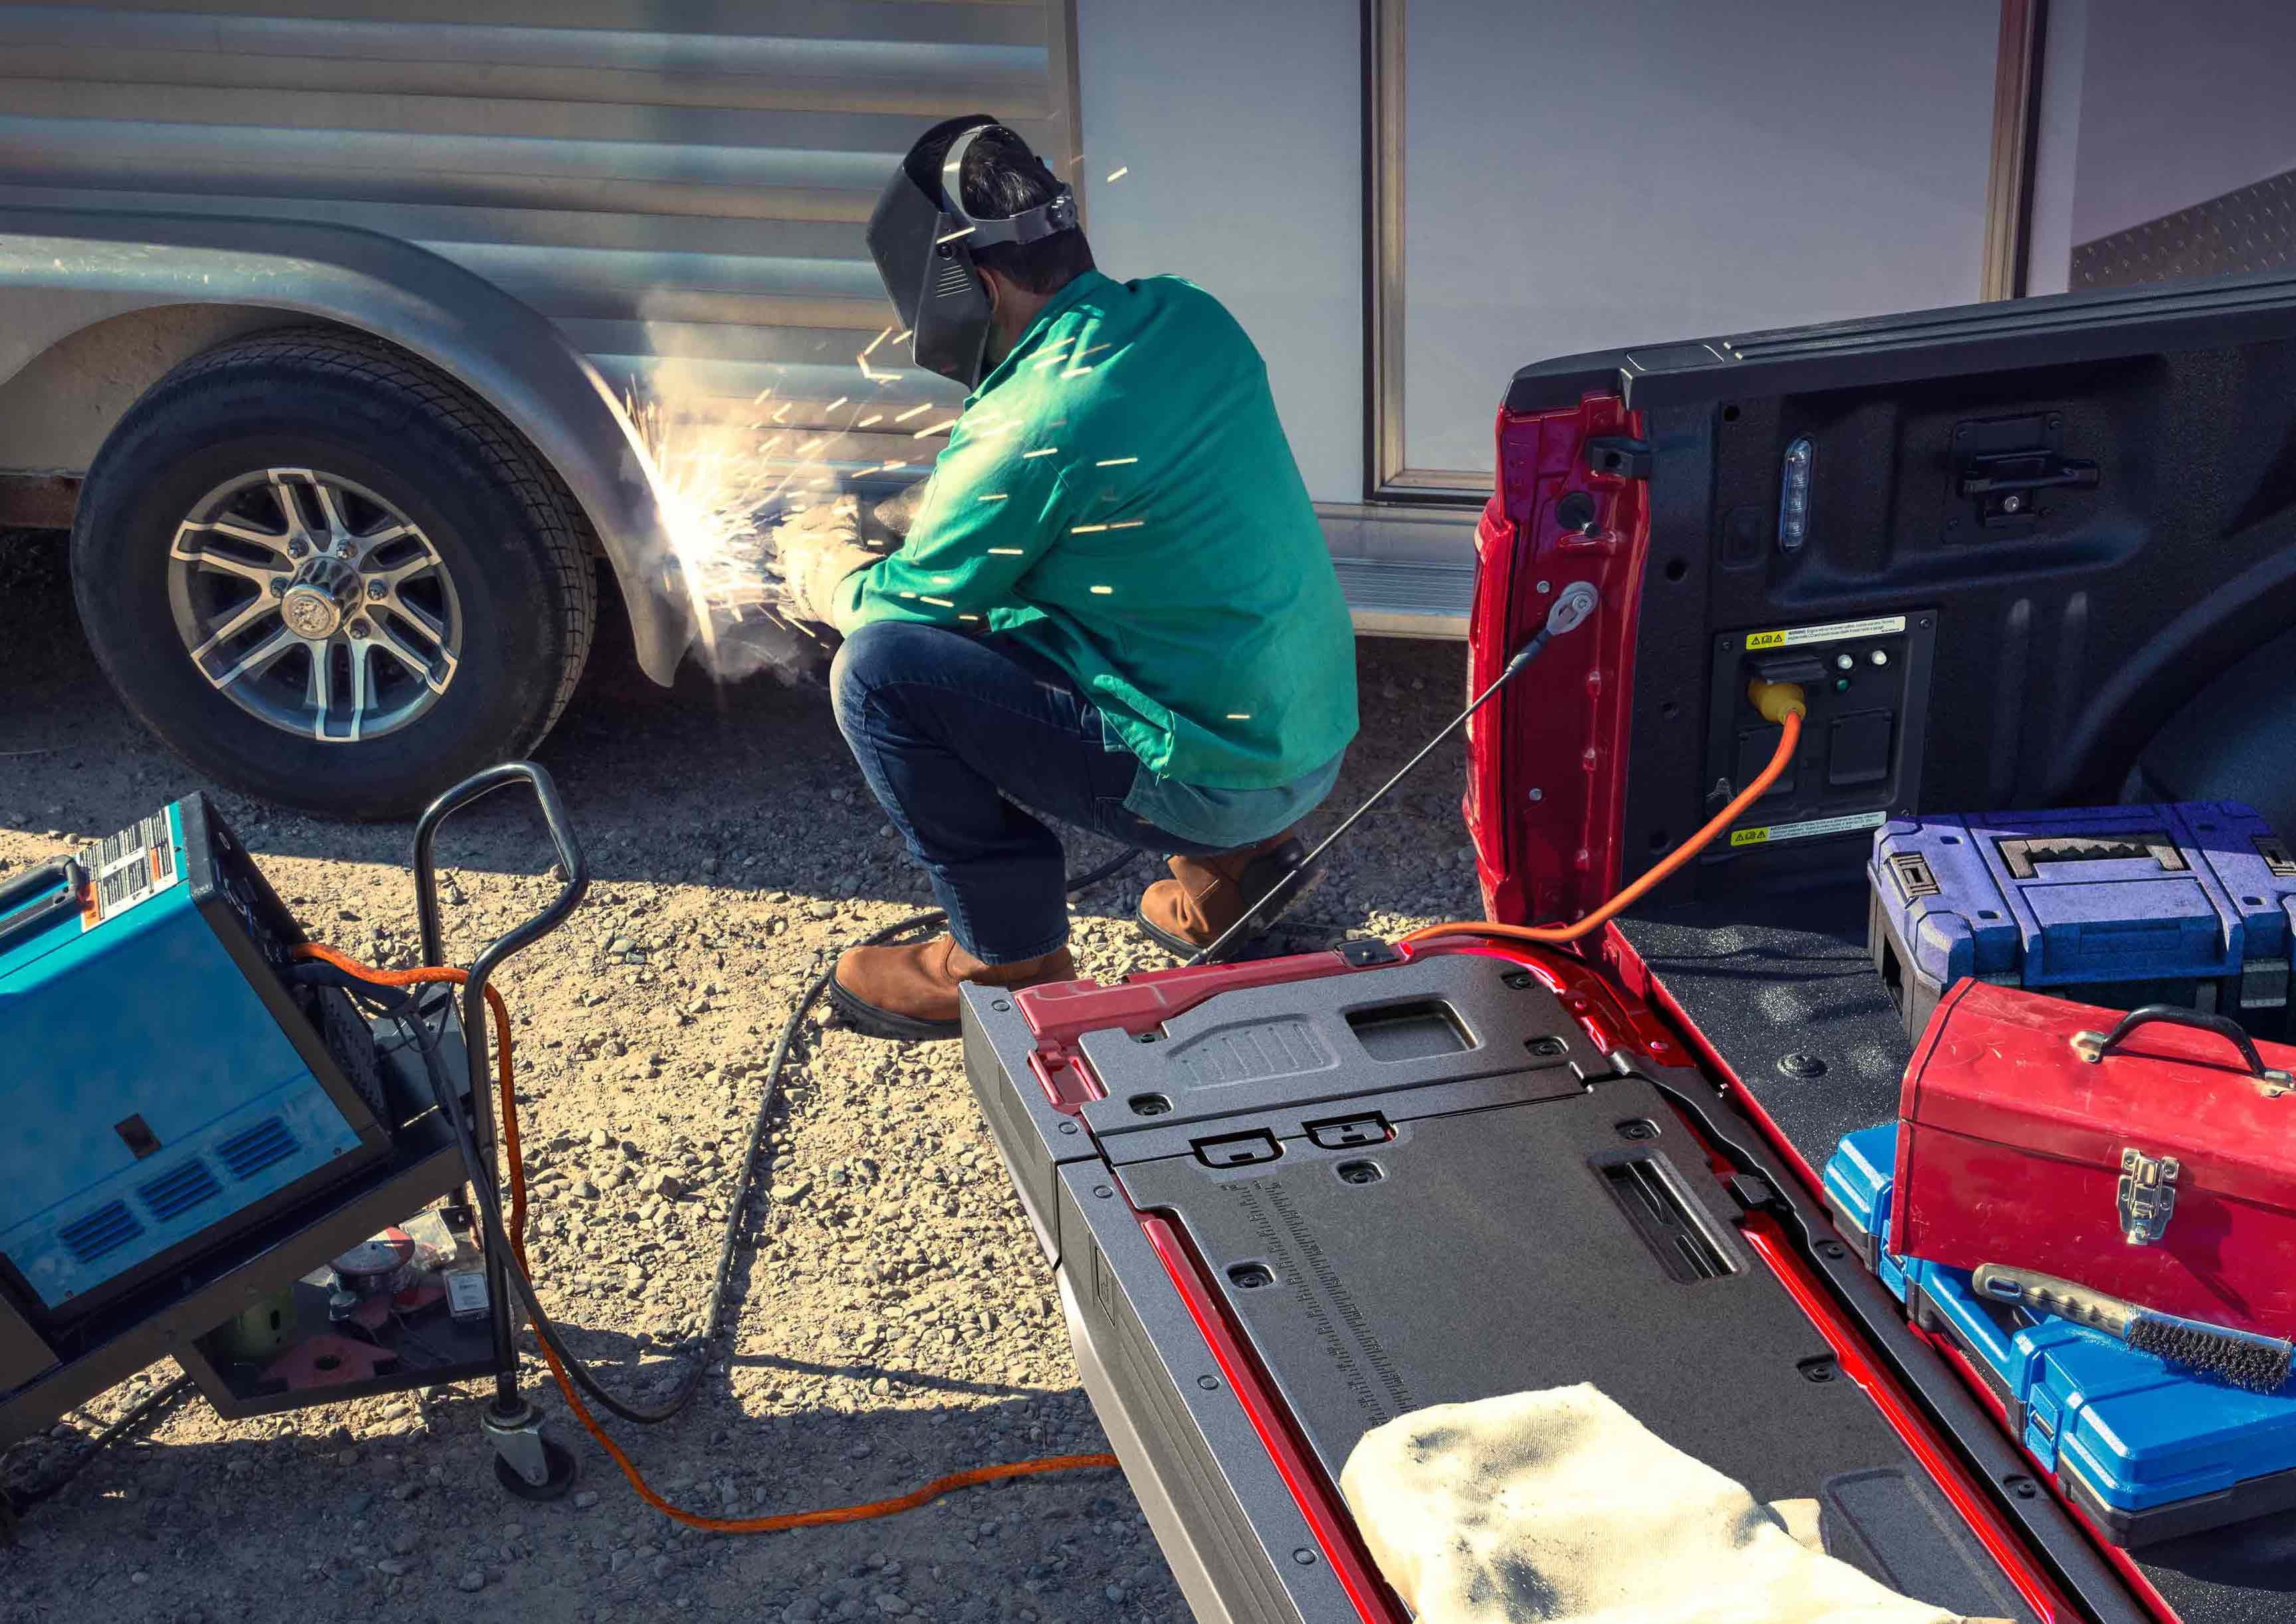 Person using a TIG welder that's plugged into the Pro Power Onboard feature located in the truck bed